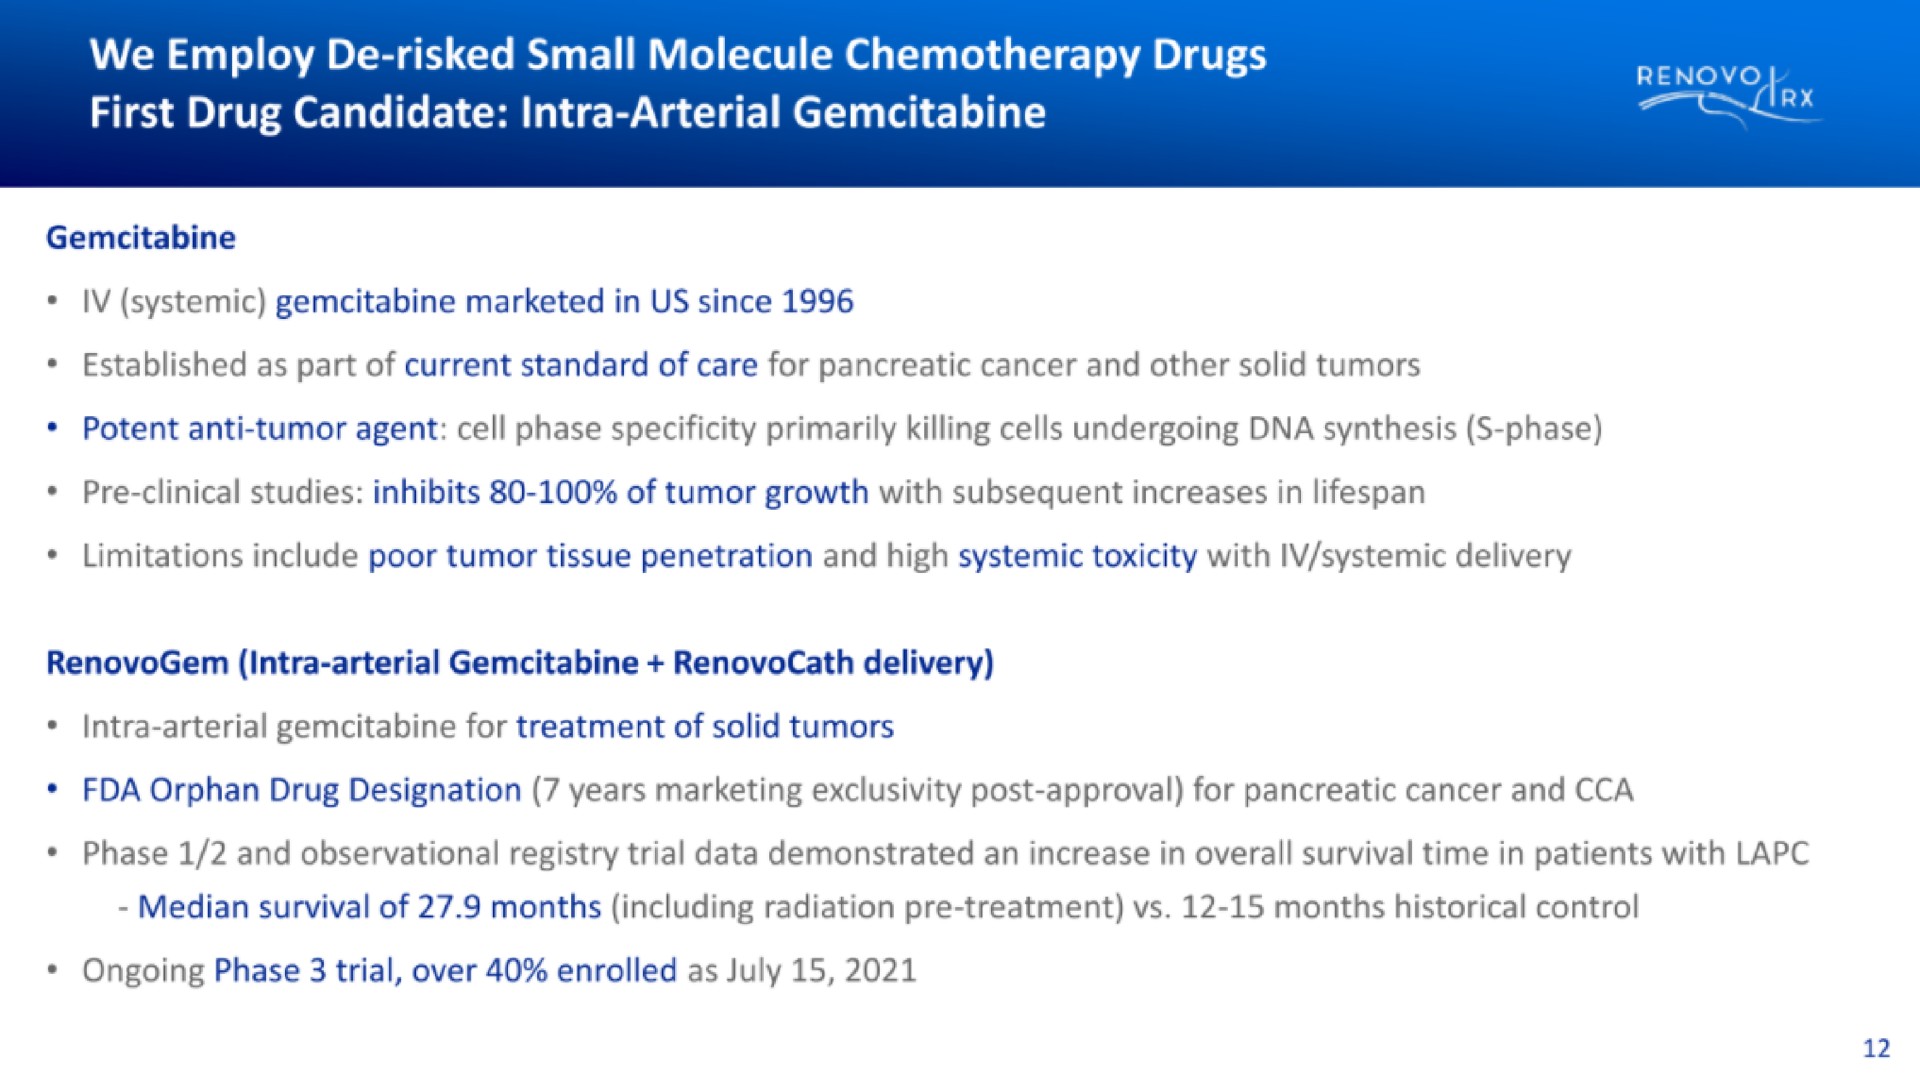 we employ risked small molecule chemotherapy drugs | RenovoRx